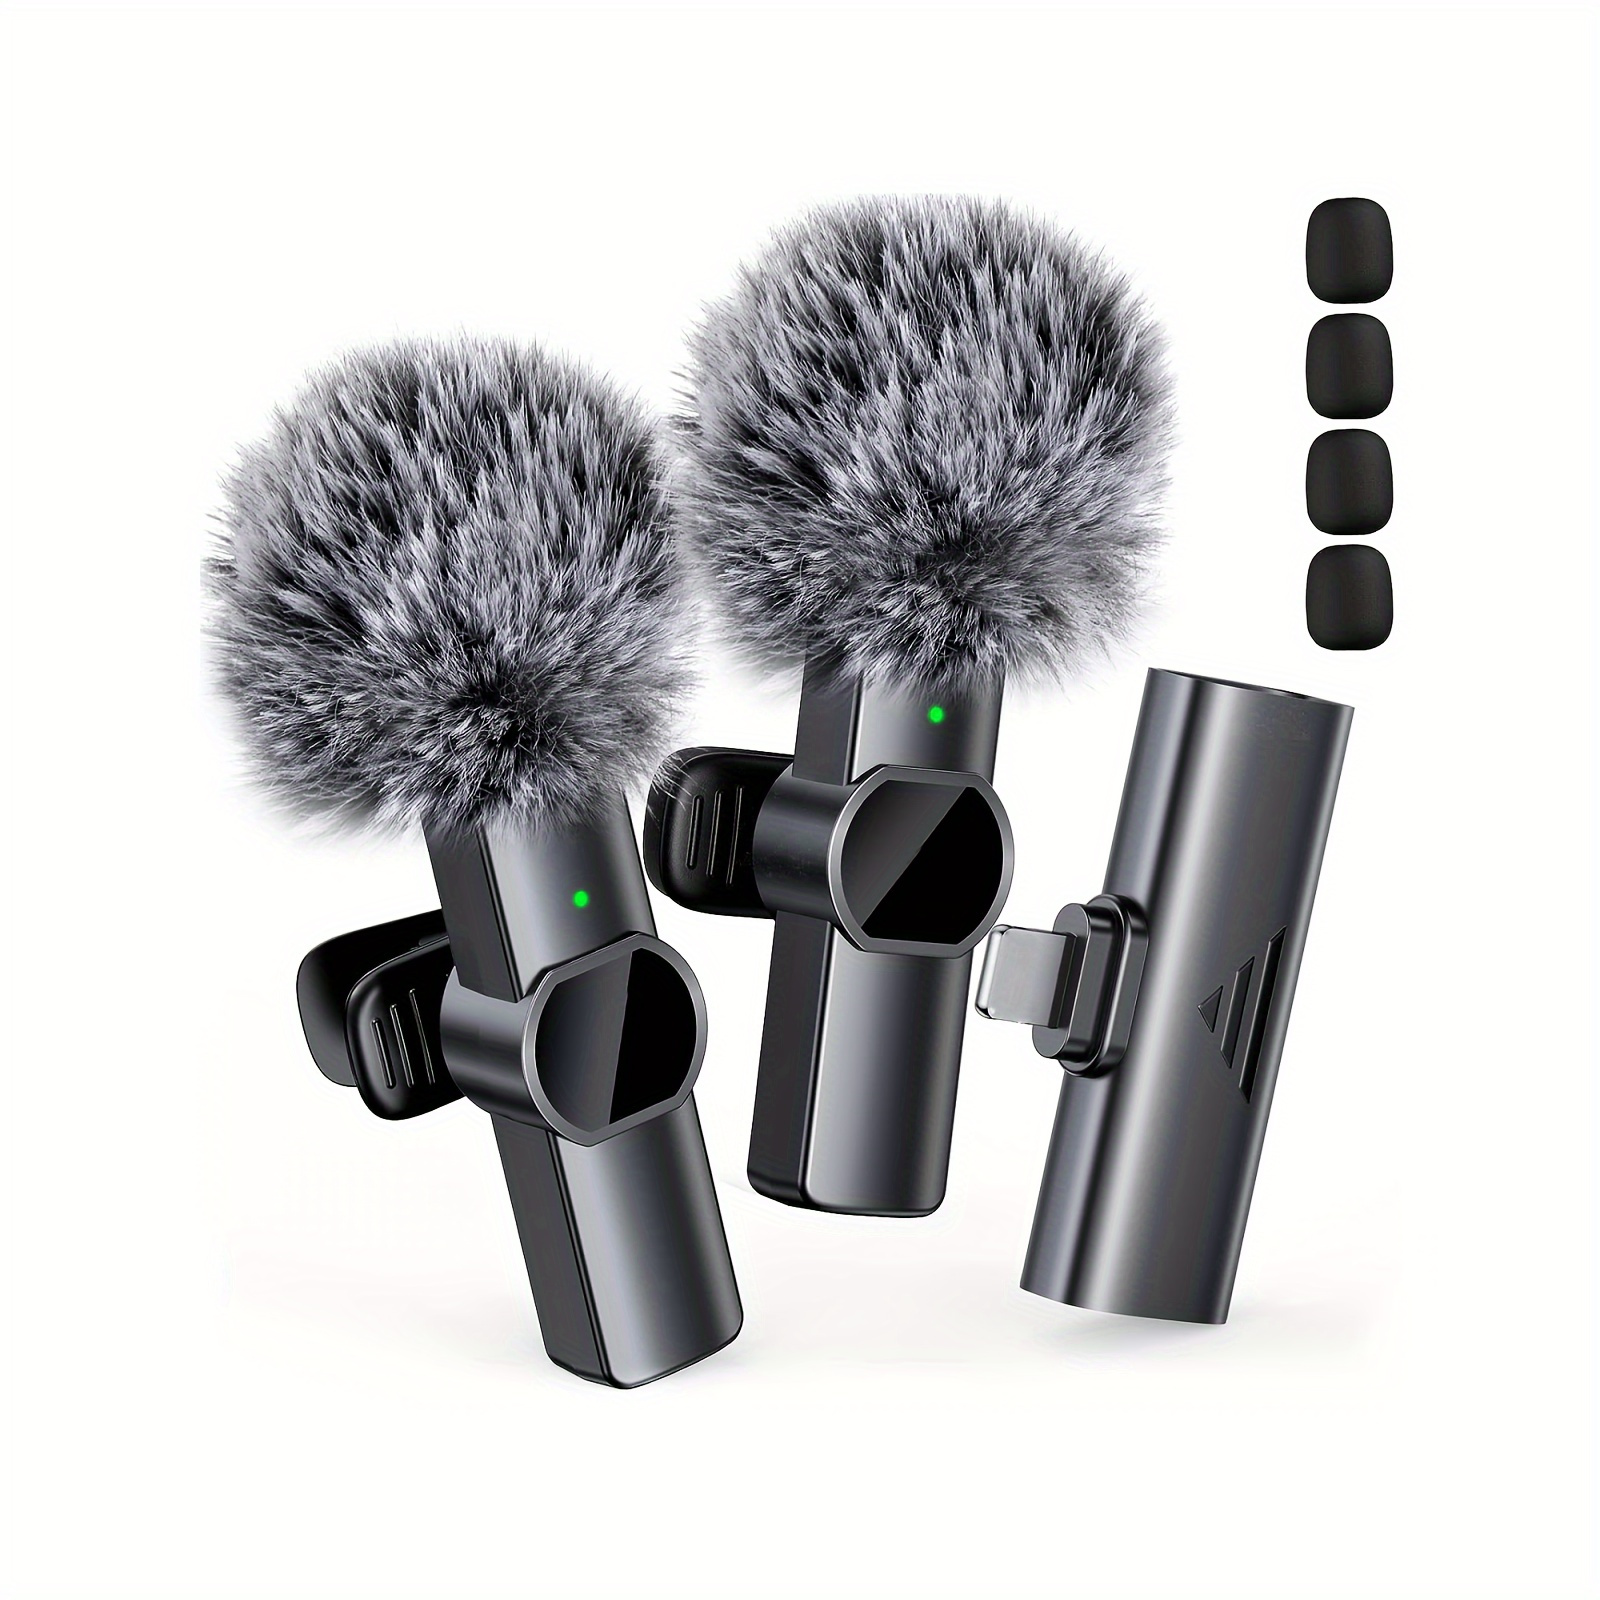 

K3max Wireless Lavalier Microphone - Noise Reduction, Portable Audio For Live Interviews, Recording, And Broadcasts - Clarity For Seamless Performances - Perfect For Artists, Vloggers, And Presenters